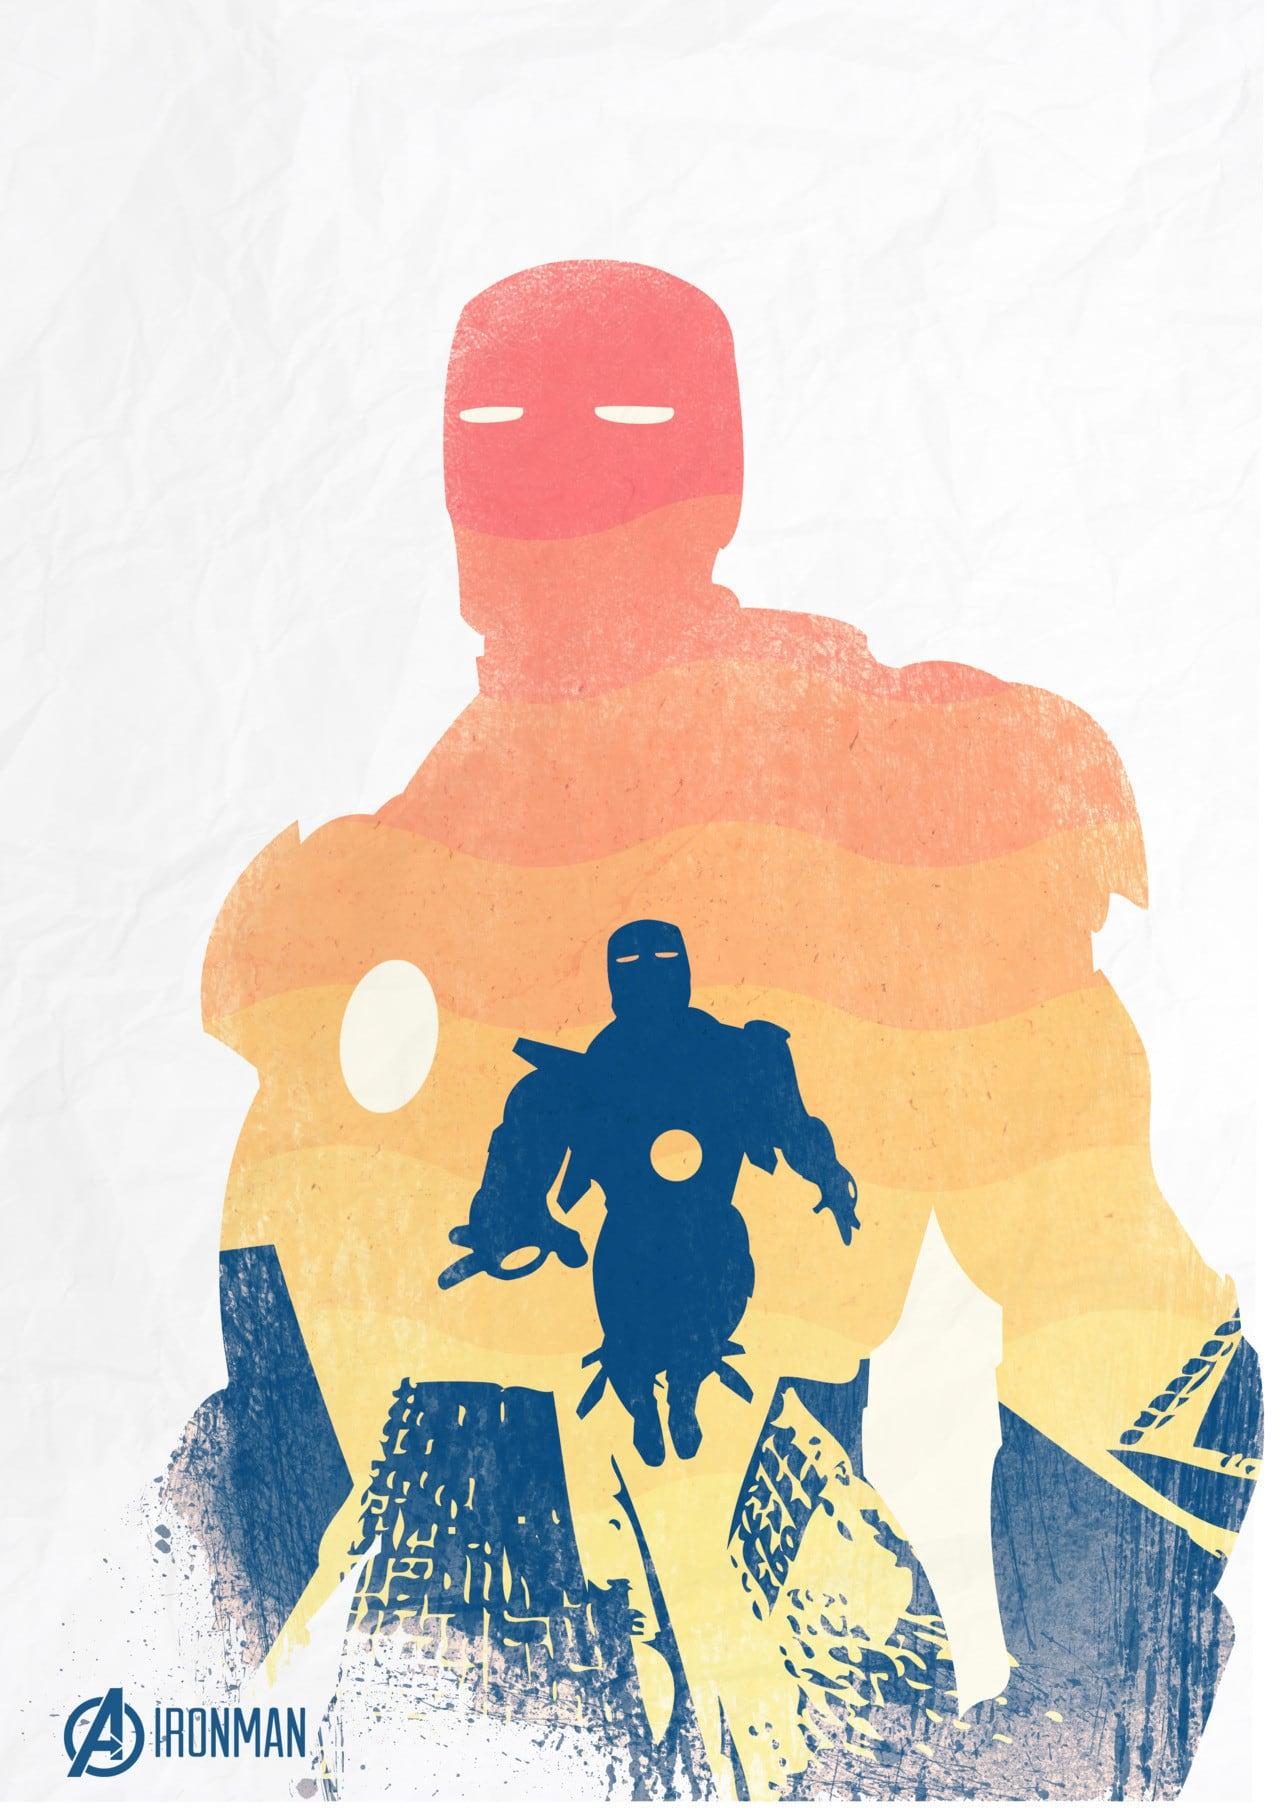 Iron Man Poster: Printable Posters Collection (Free Download)